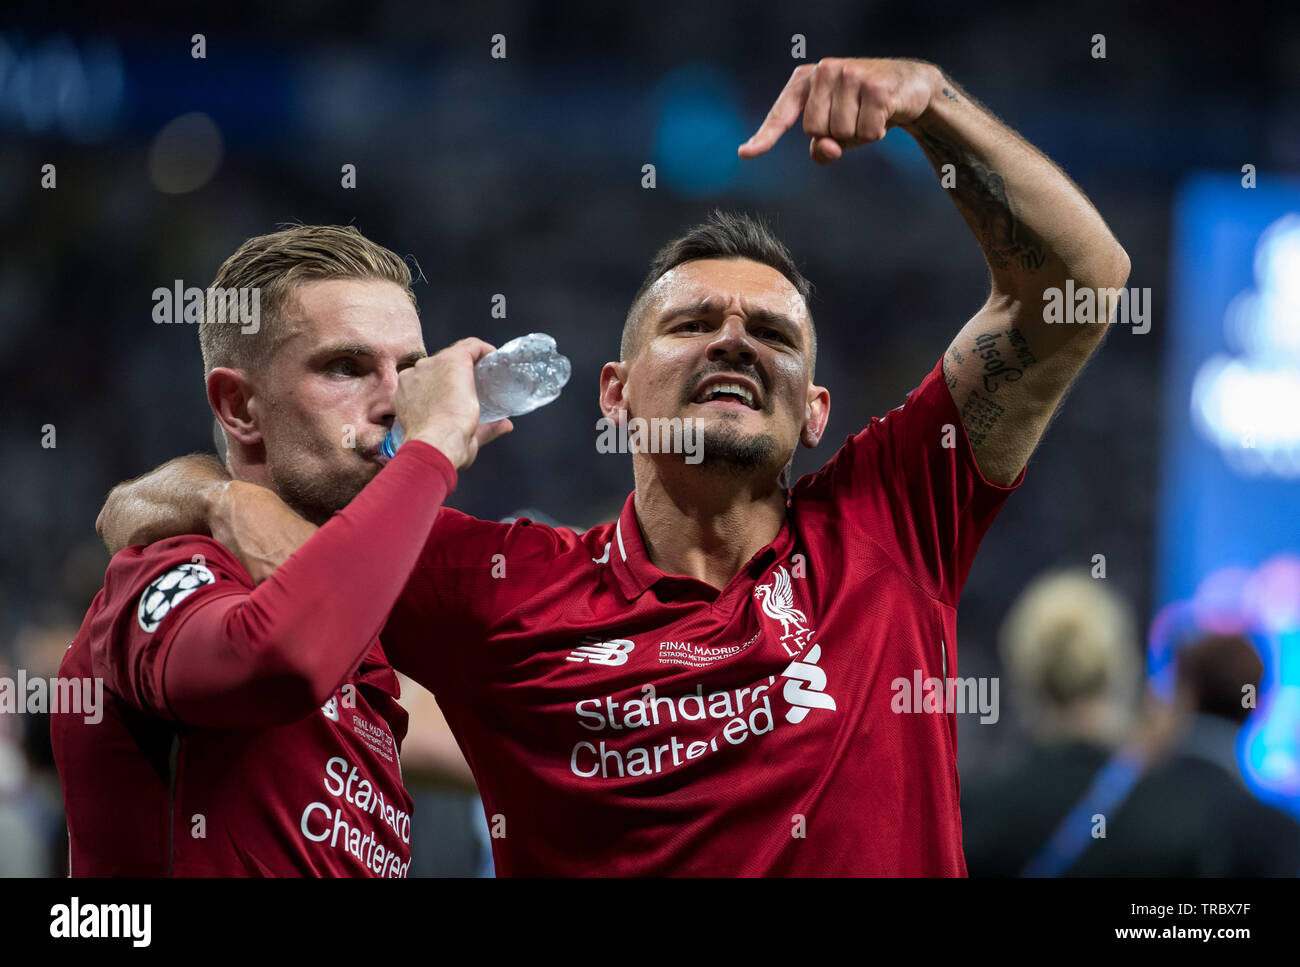 Dejan Lovren (right) & Jordan Henderson of Liverpool during the UEFA Champions League FINAL match between Tottenham Hotspur and Liverpool at the Metro Stock Photo